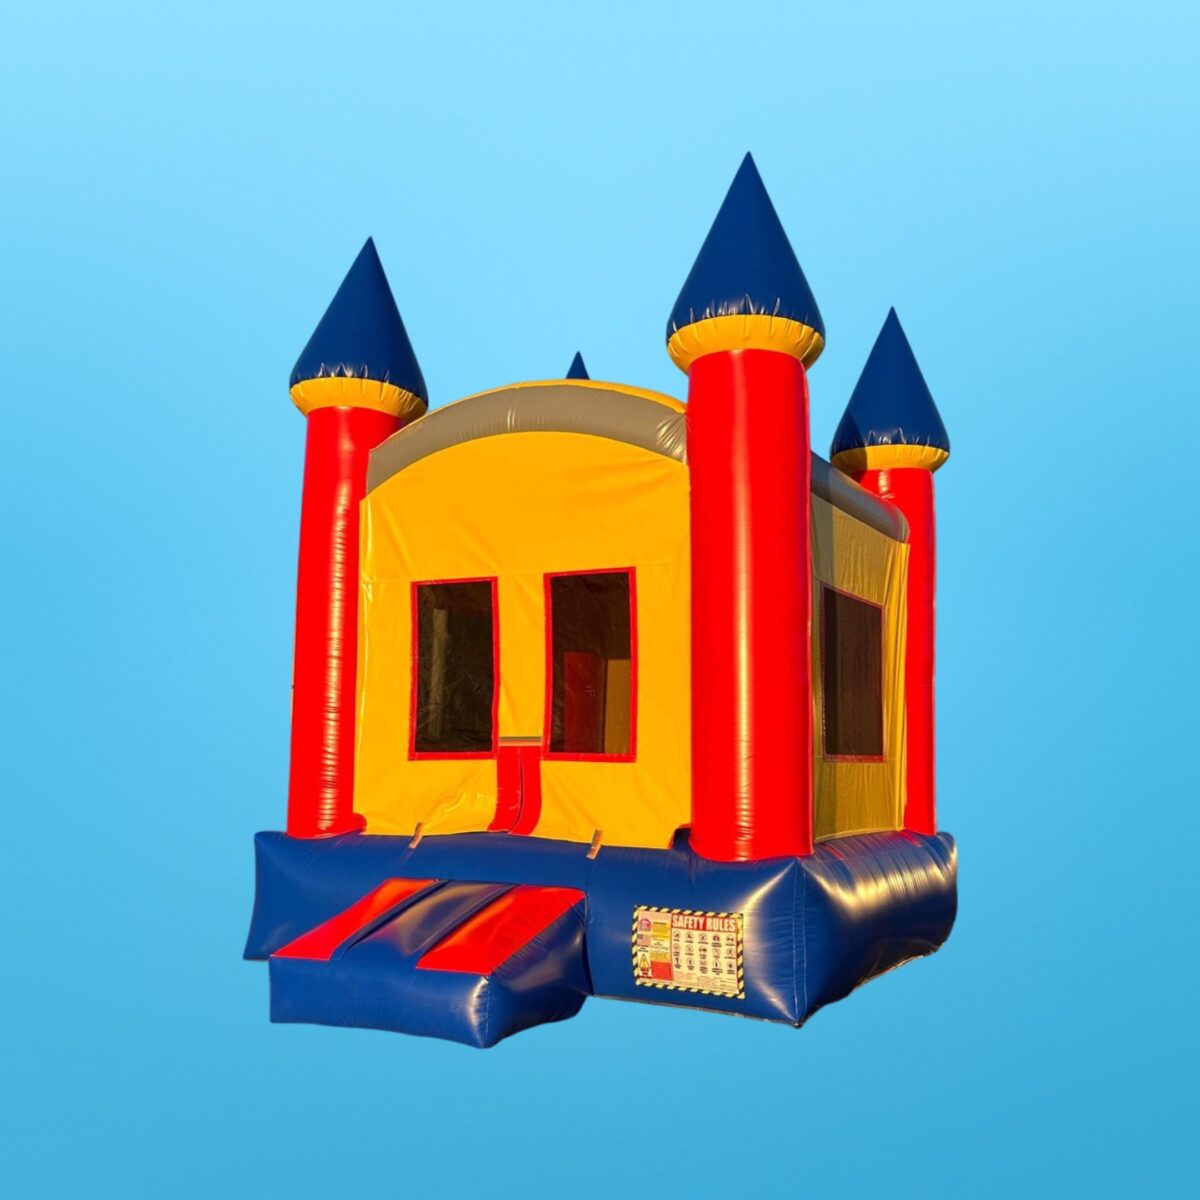 11x11 Bounce House Rentals